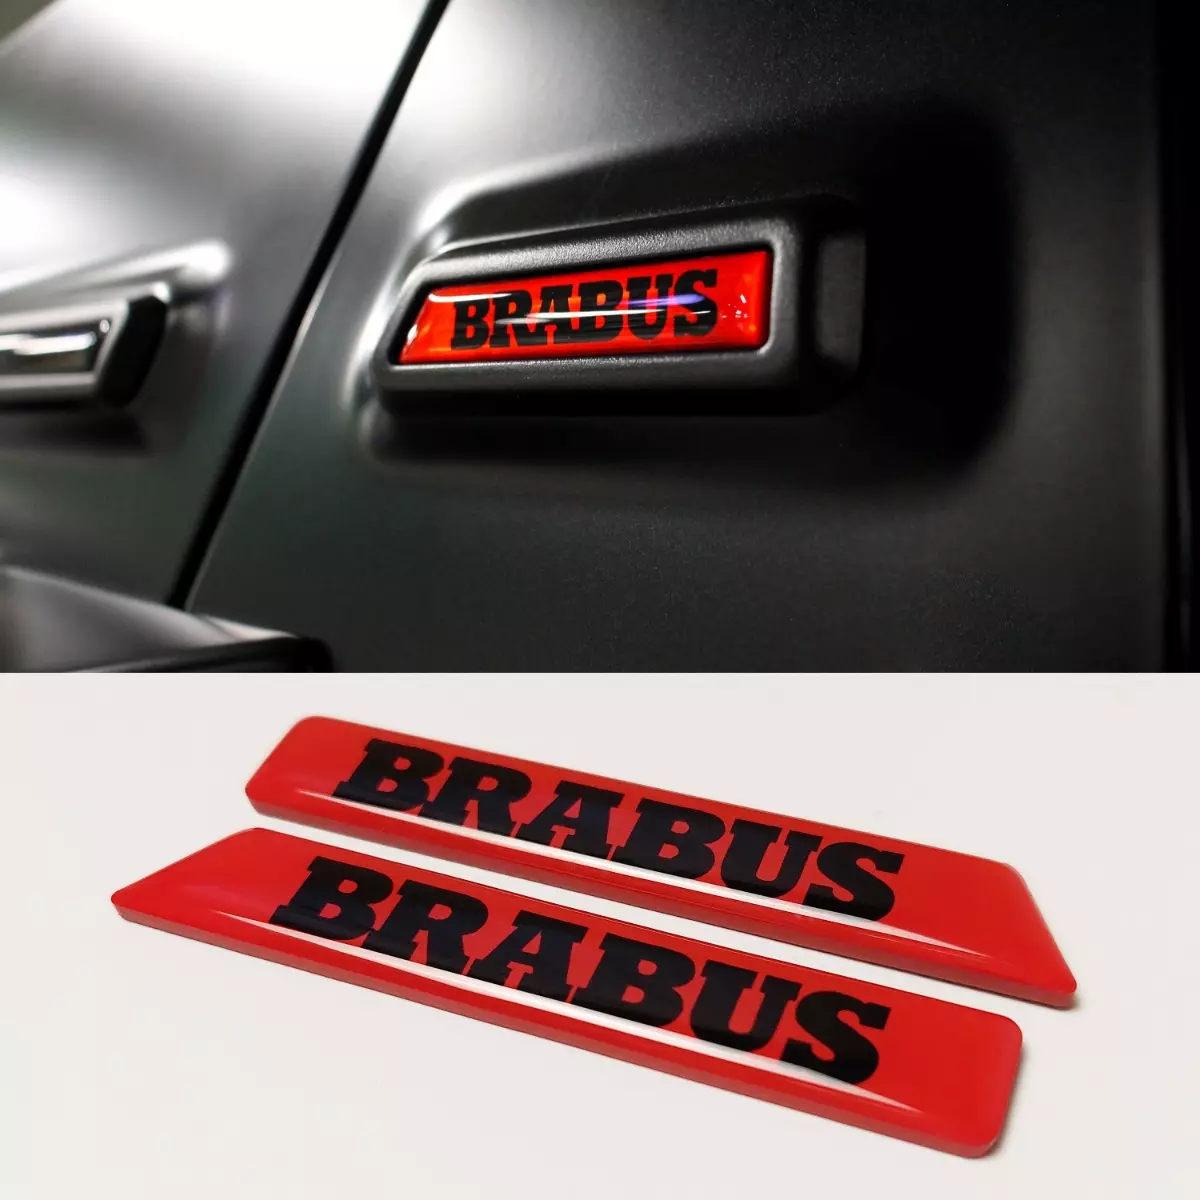 Brabus Rocket G900 Style Fender Emblems Side Moldings Inserts for Mercedes W463A G-Class